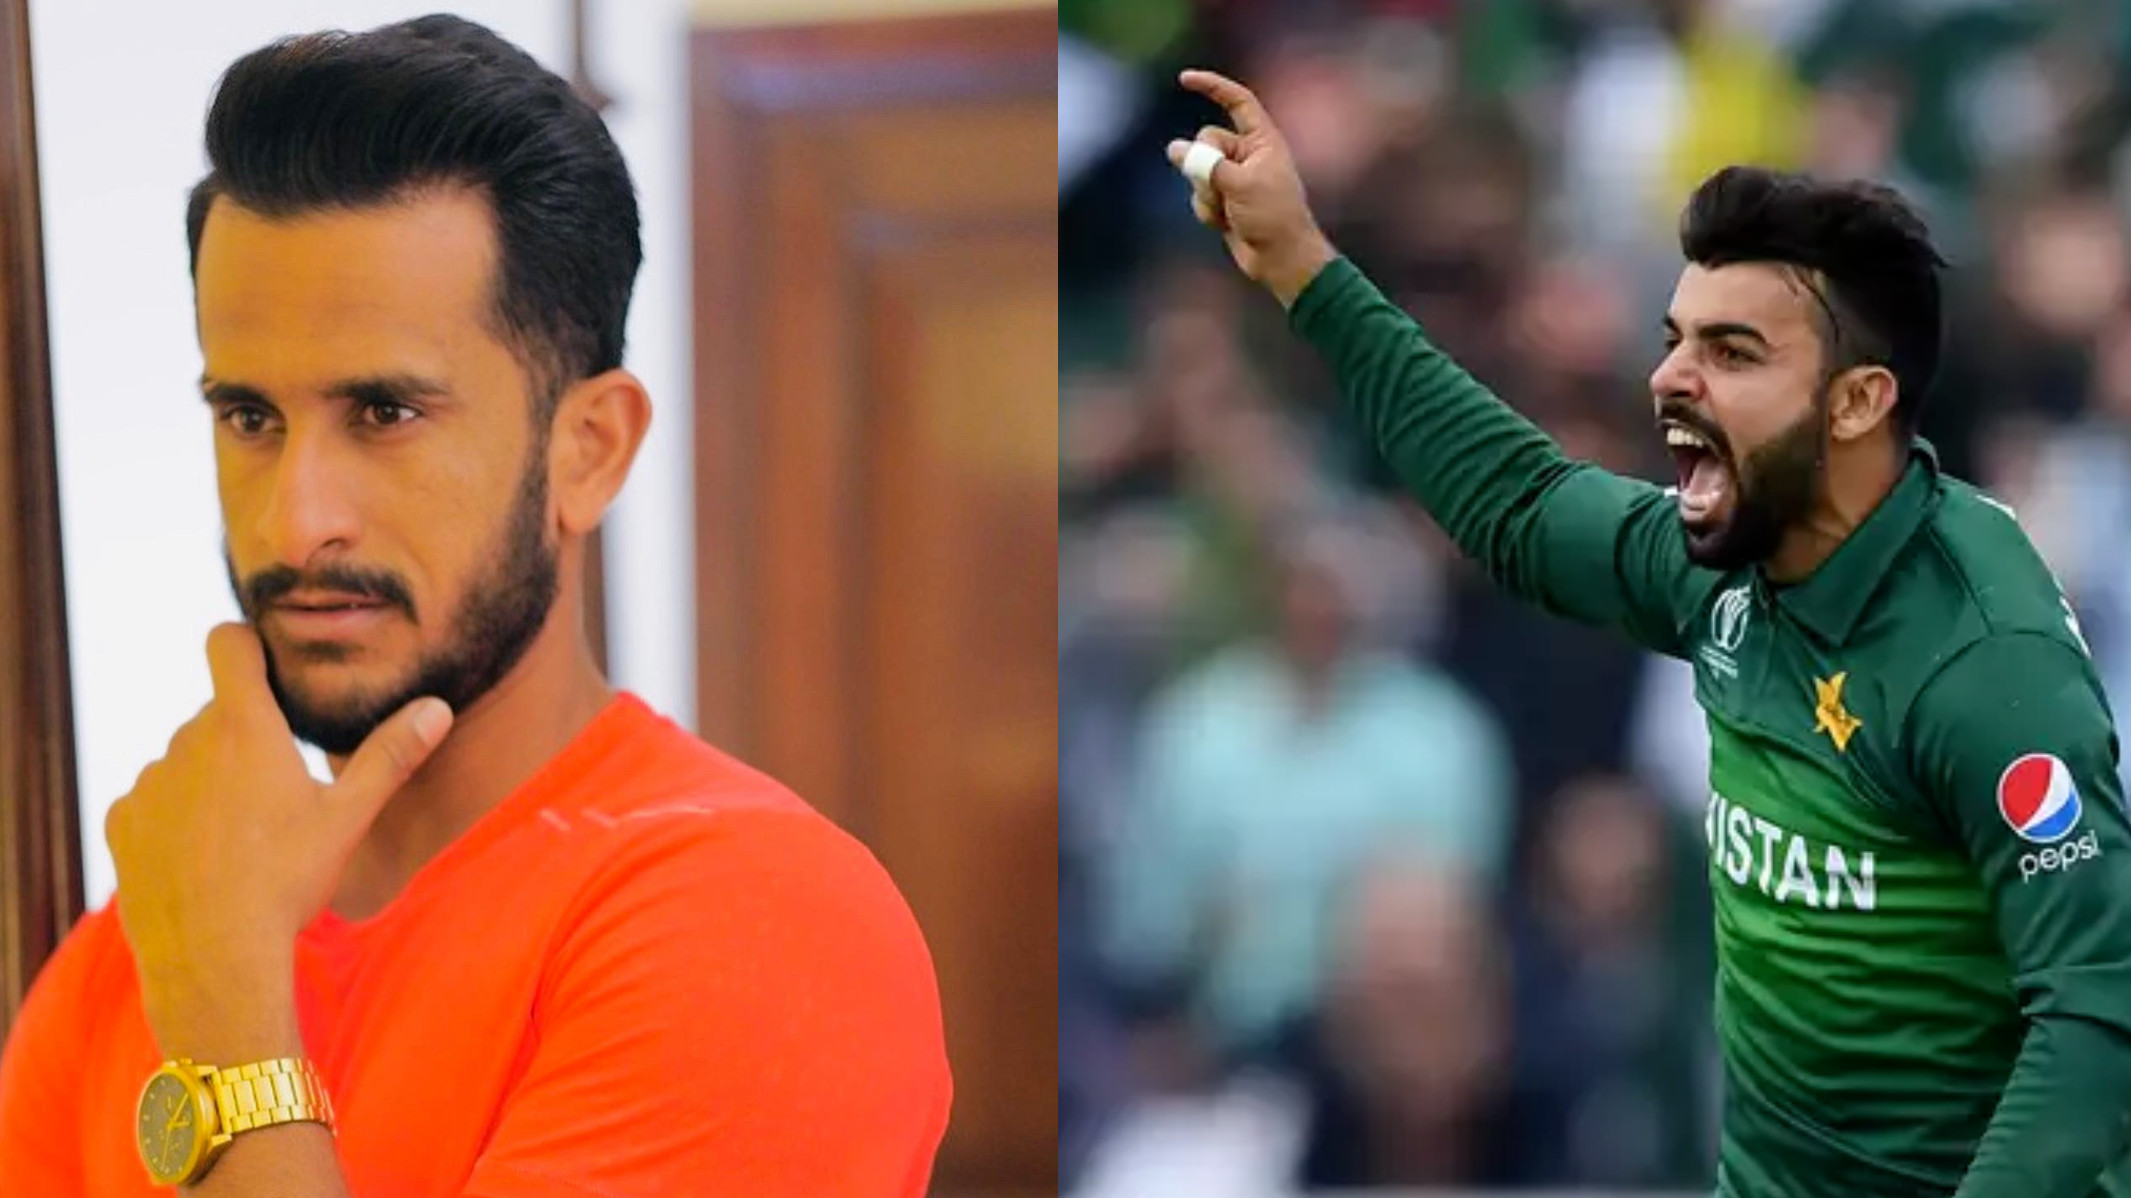 “Nice watch, Ab haath neechay ker lo” - Shadab Khan's hilarious comment on Hassan Ali’s photo